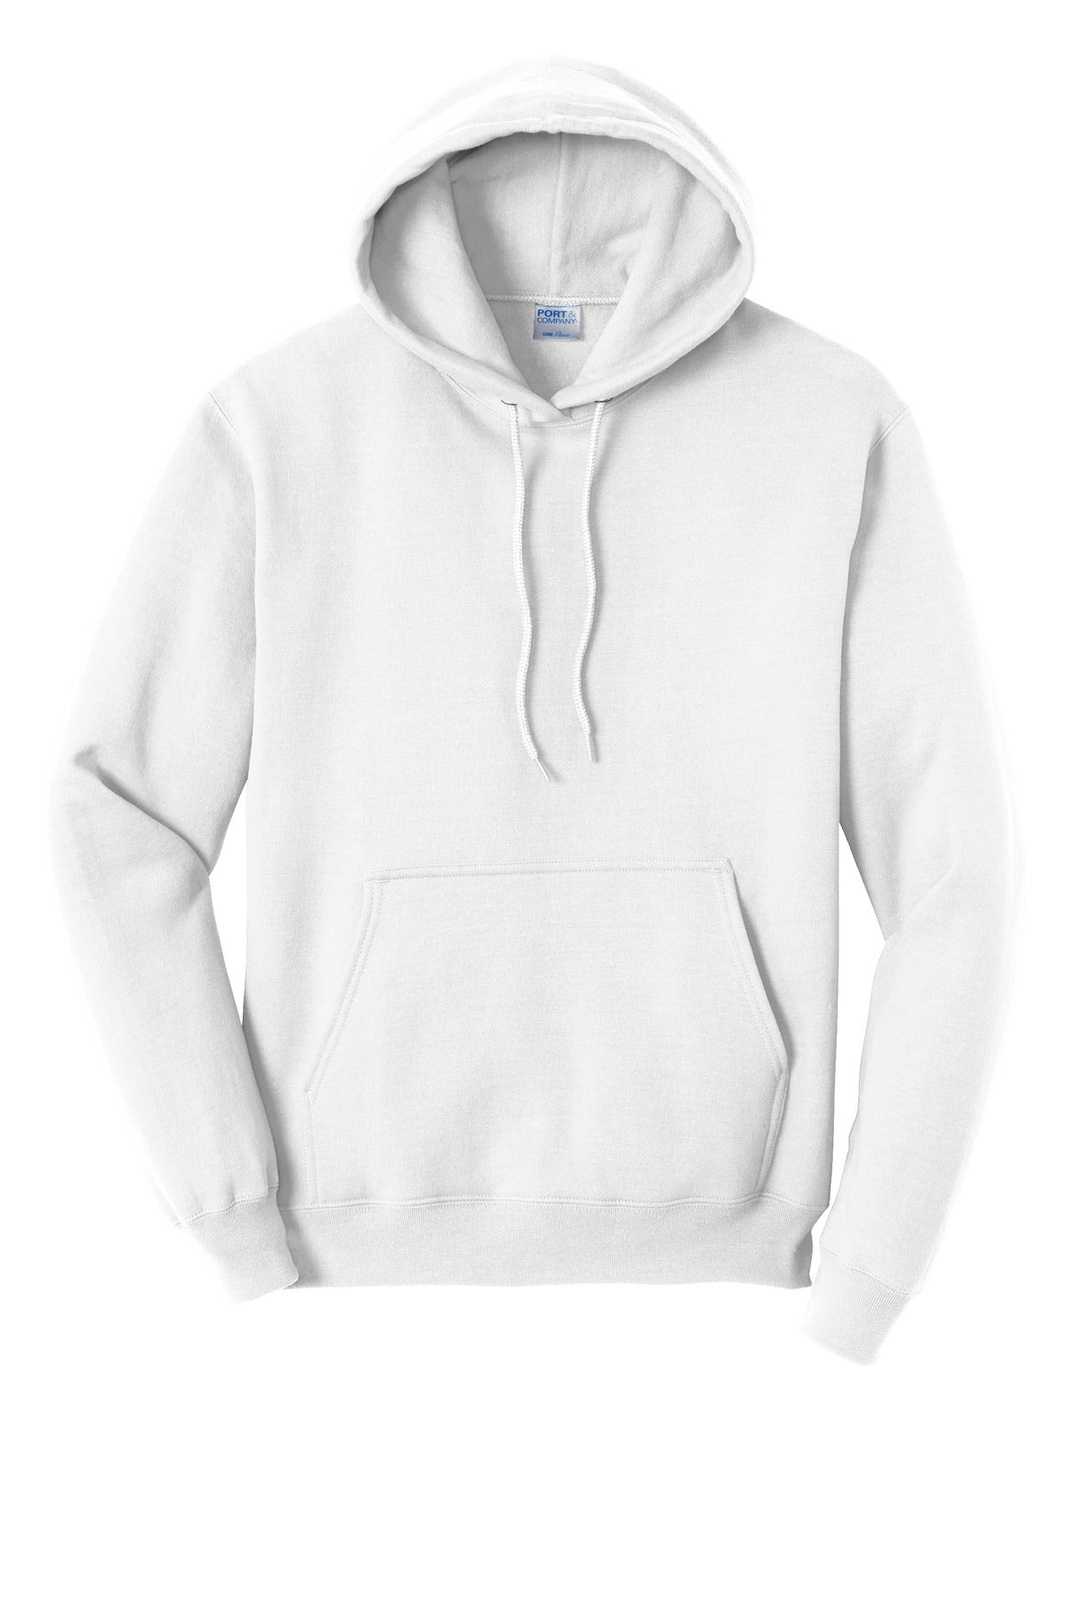 Port & Company PC79H Fleece Pullover Hooded Sweatshirt - White - HIT a Double - 1